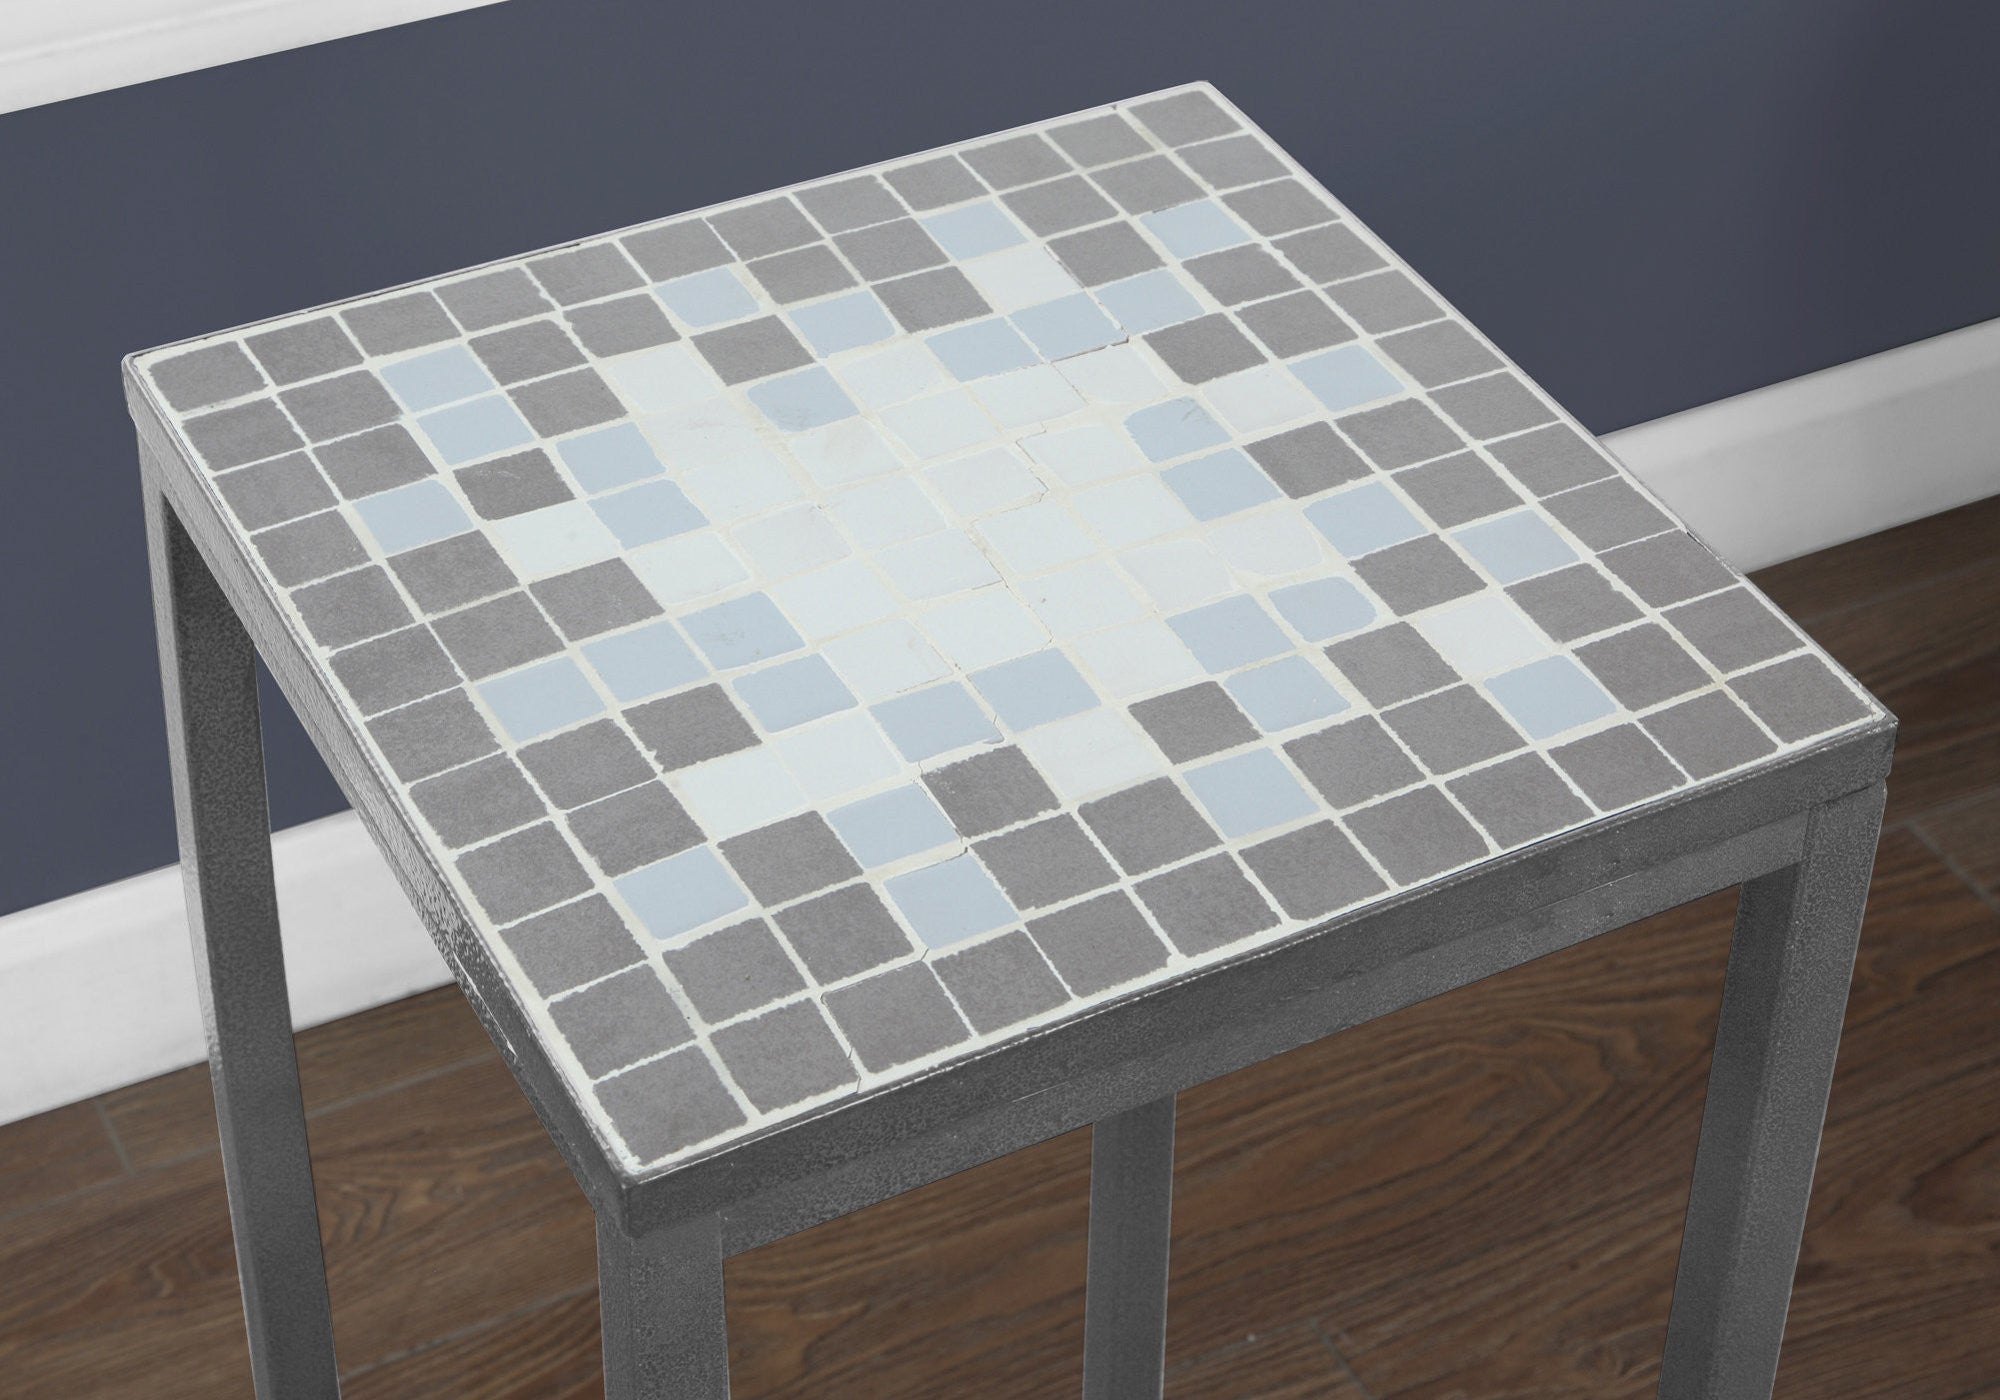 28" Grey Tile End Table